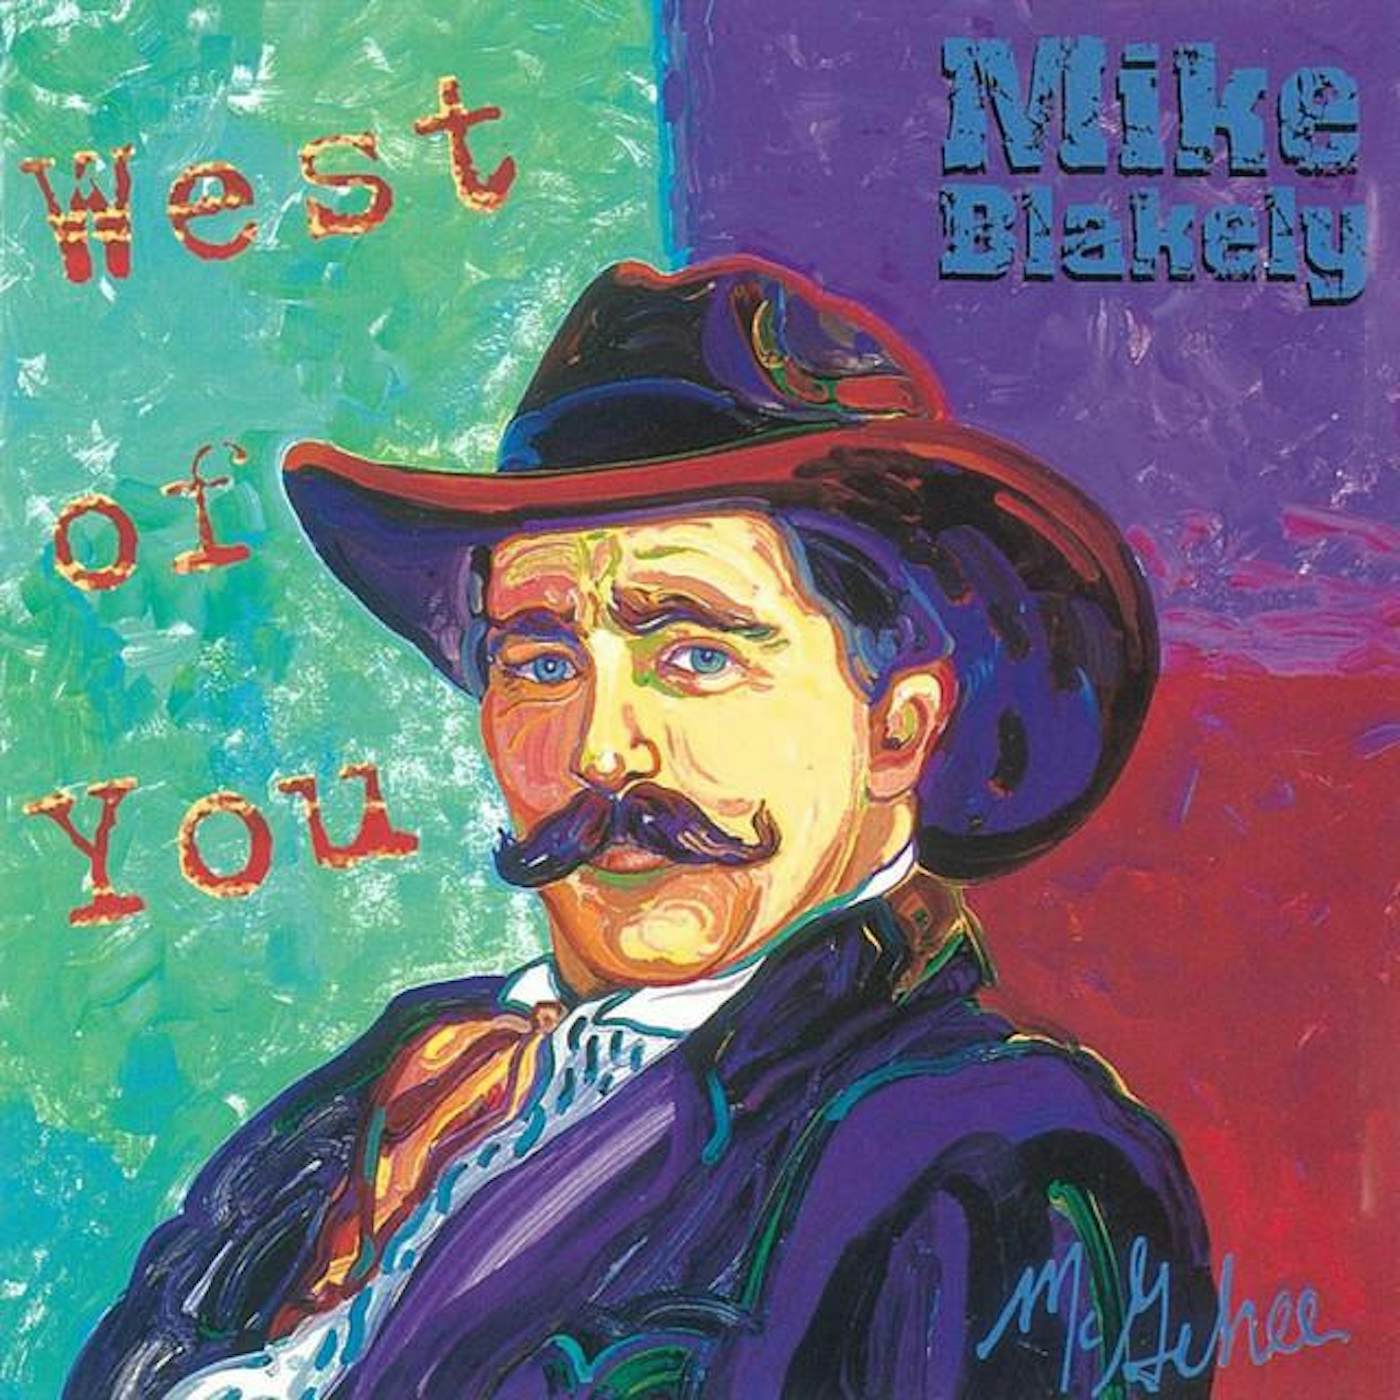 Mike Blakely